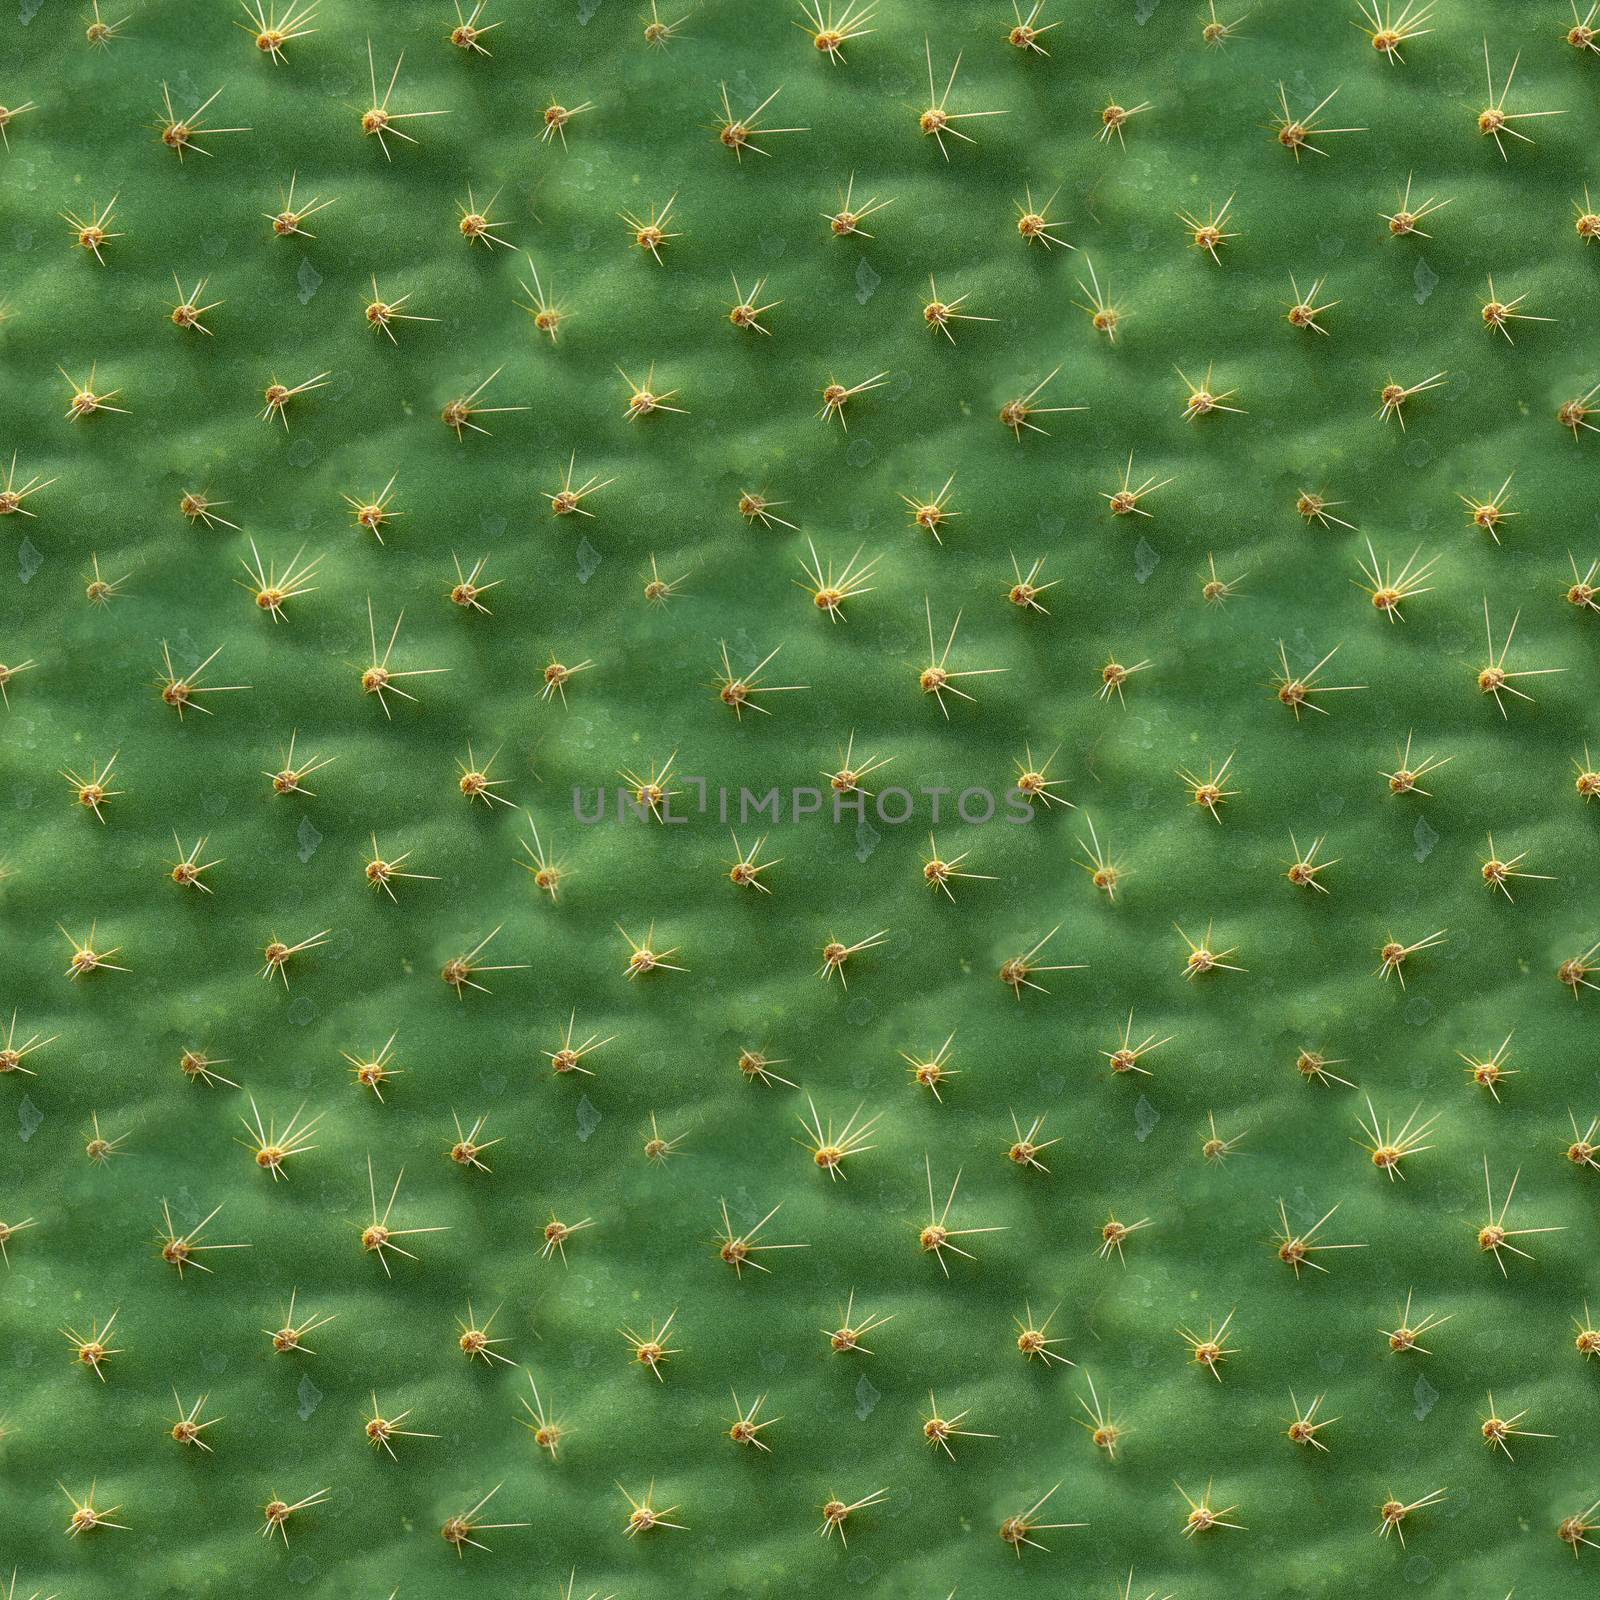 Cactus leaf structure as background or wallpaper